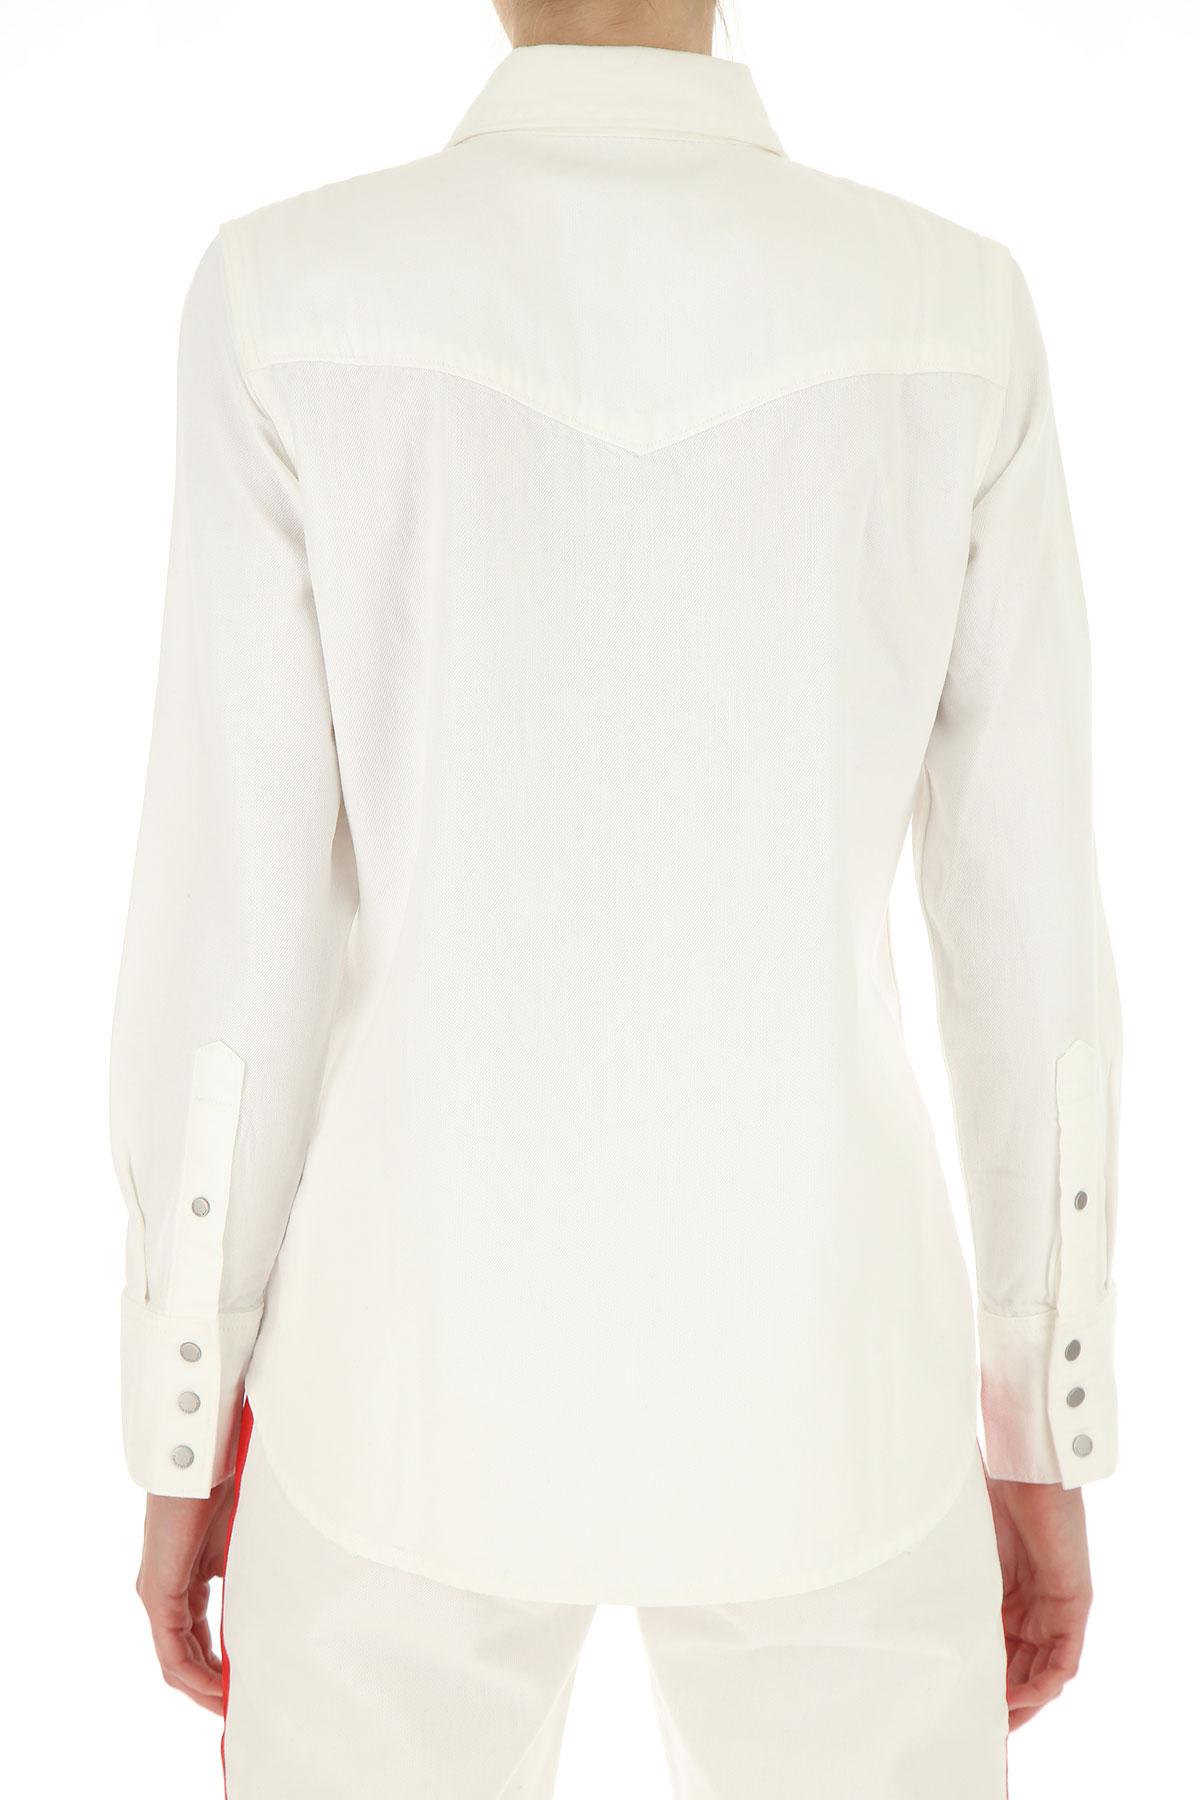 Calvin Klein Shirt For Women On Sale In Outlet in White - Lyst